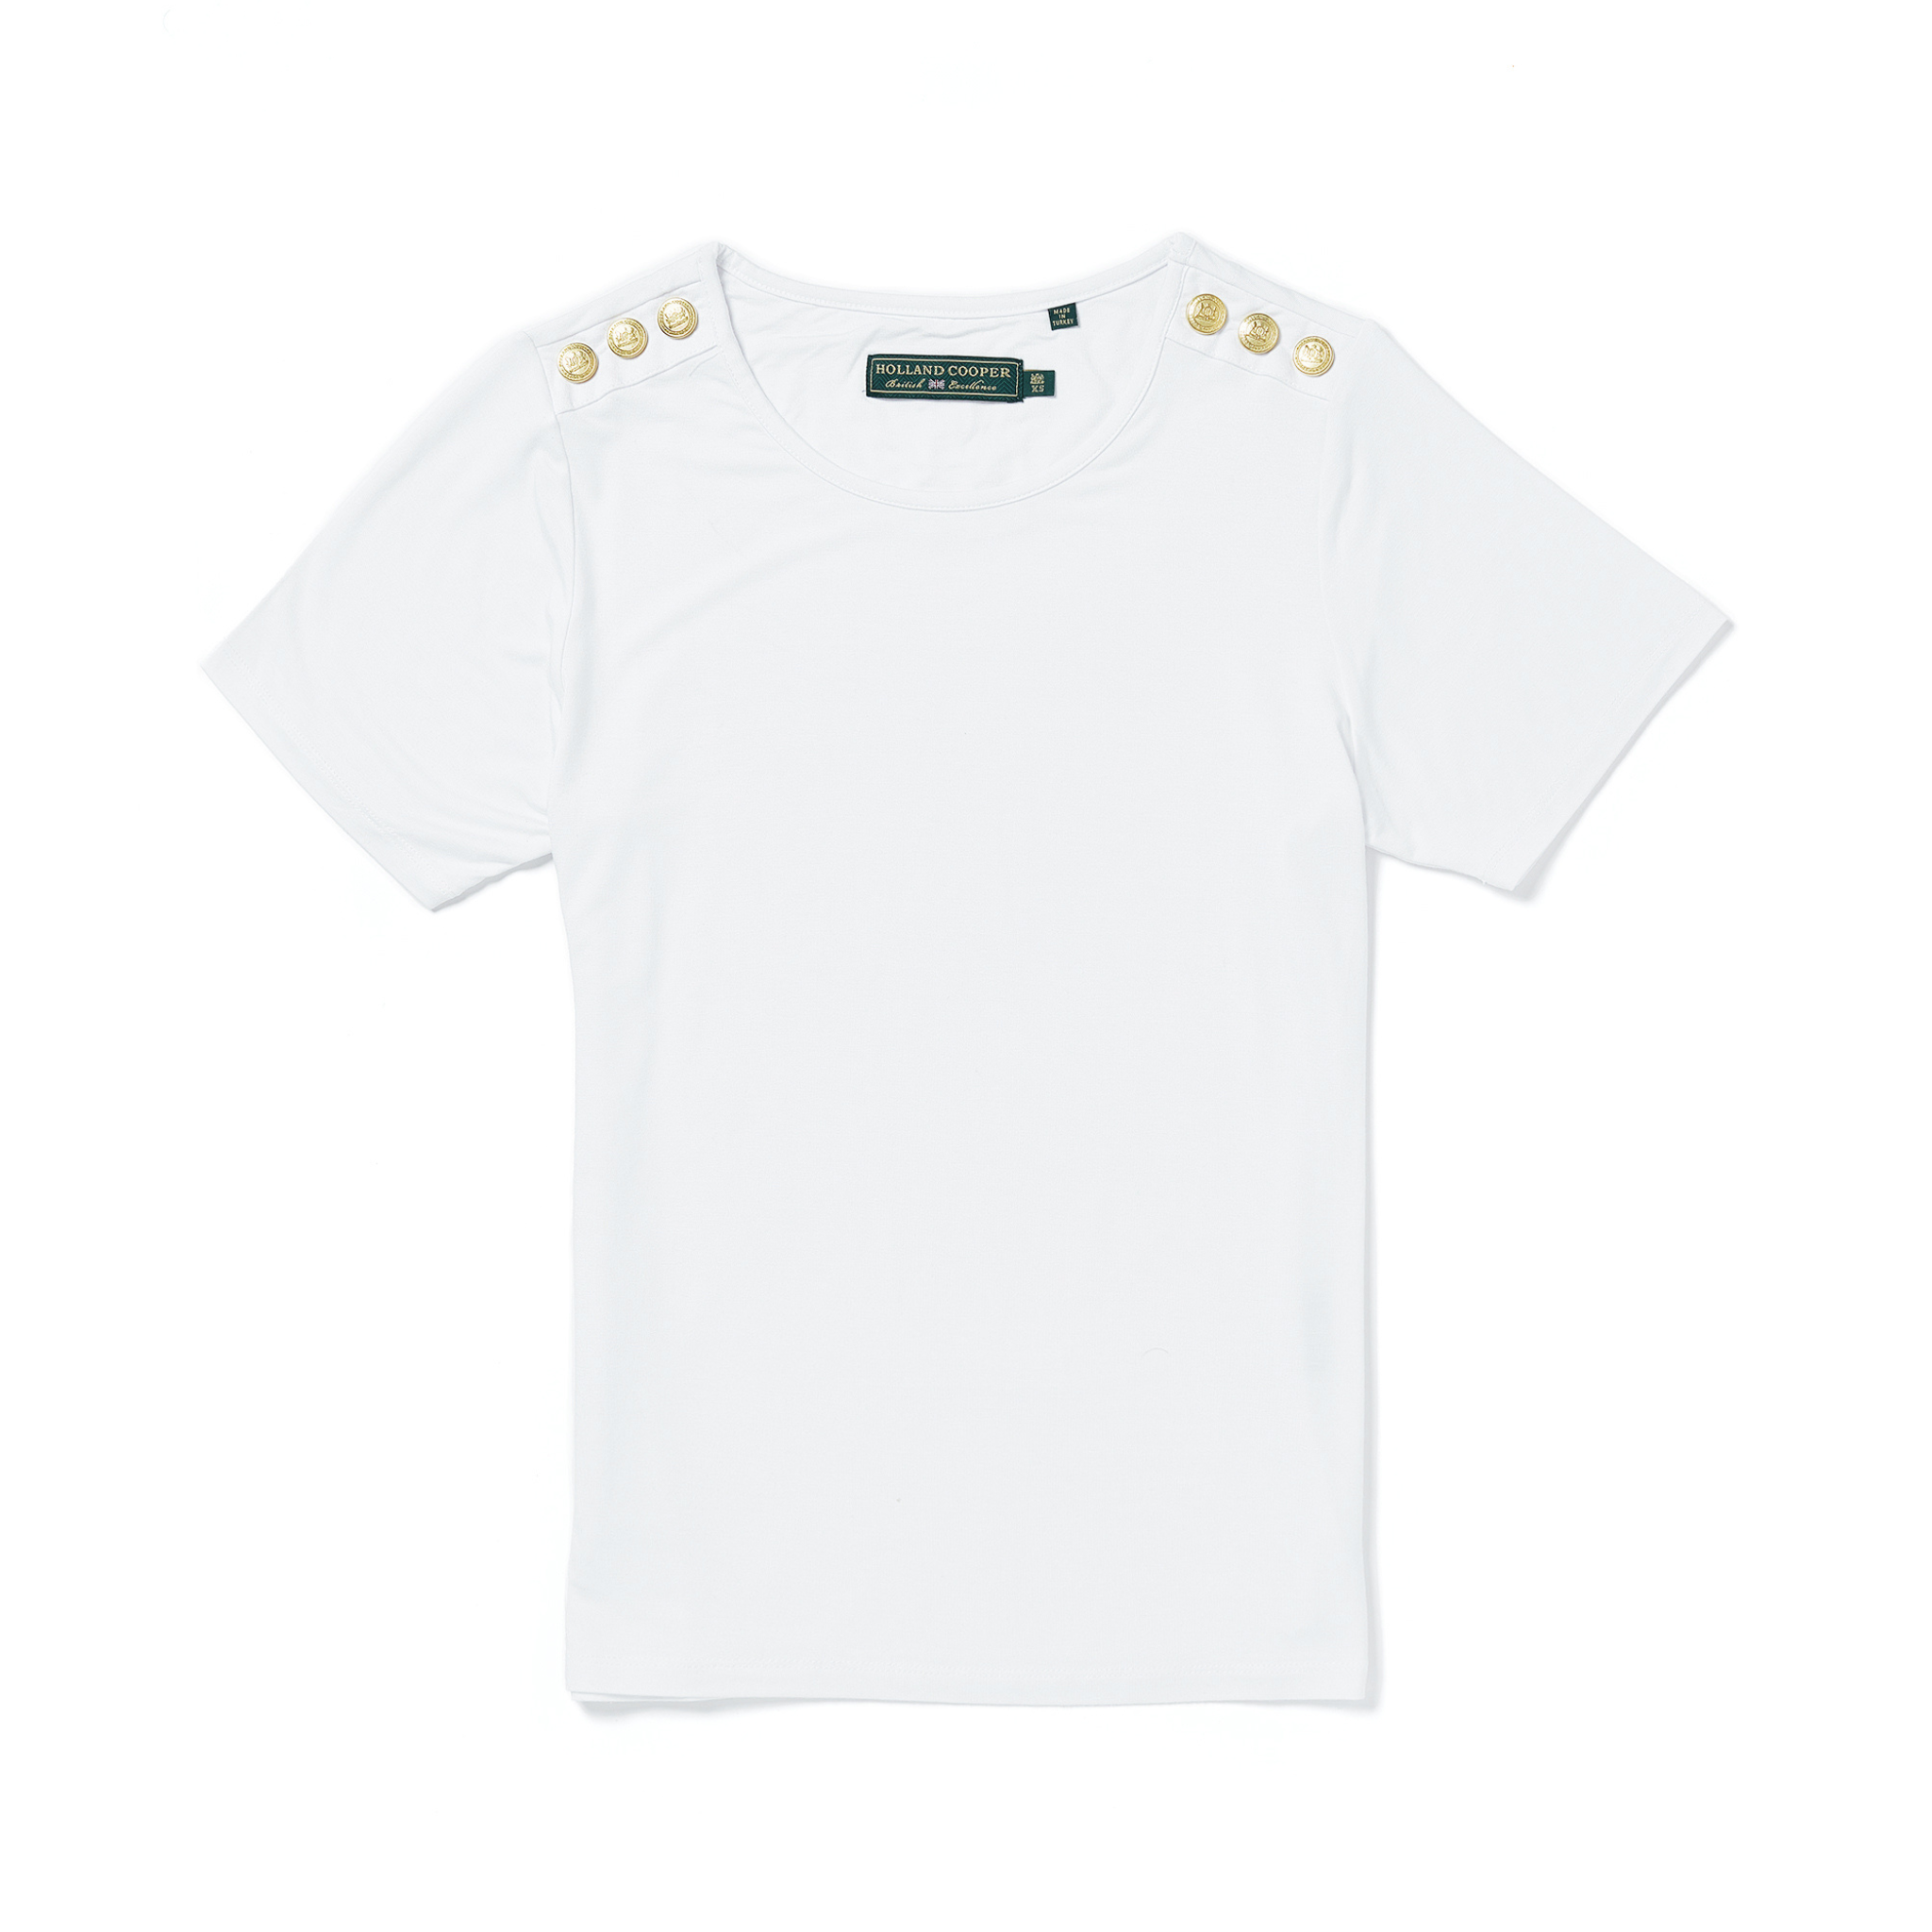 Relax Fit Crew Neck Tee White